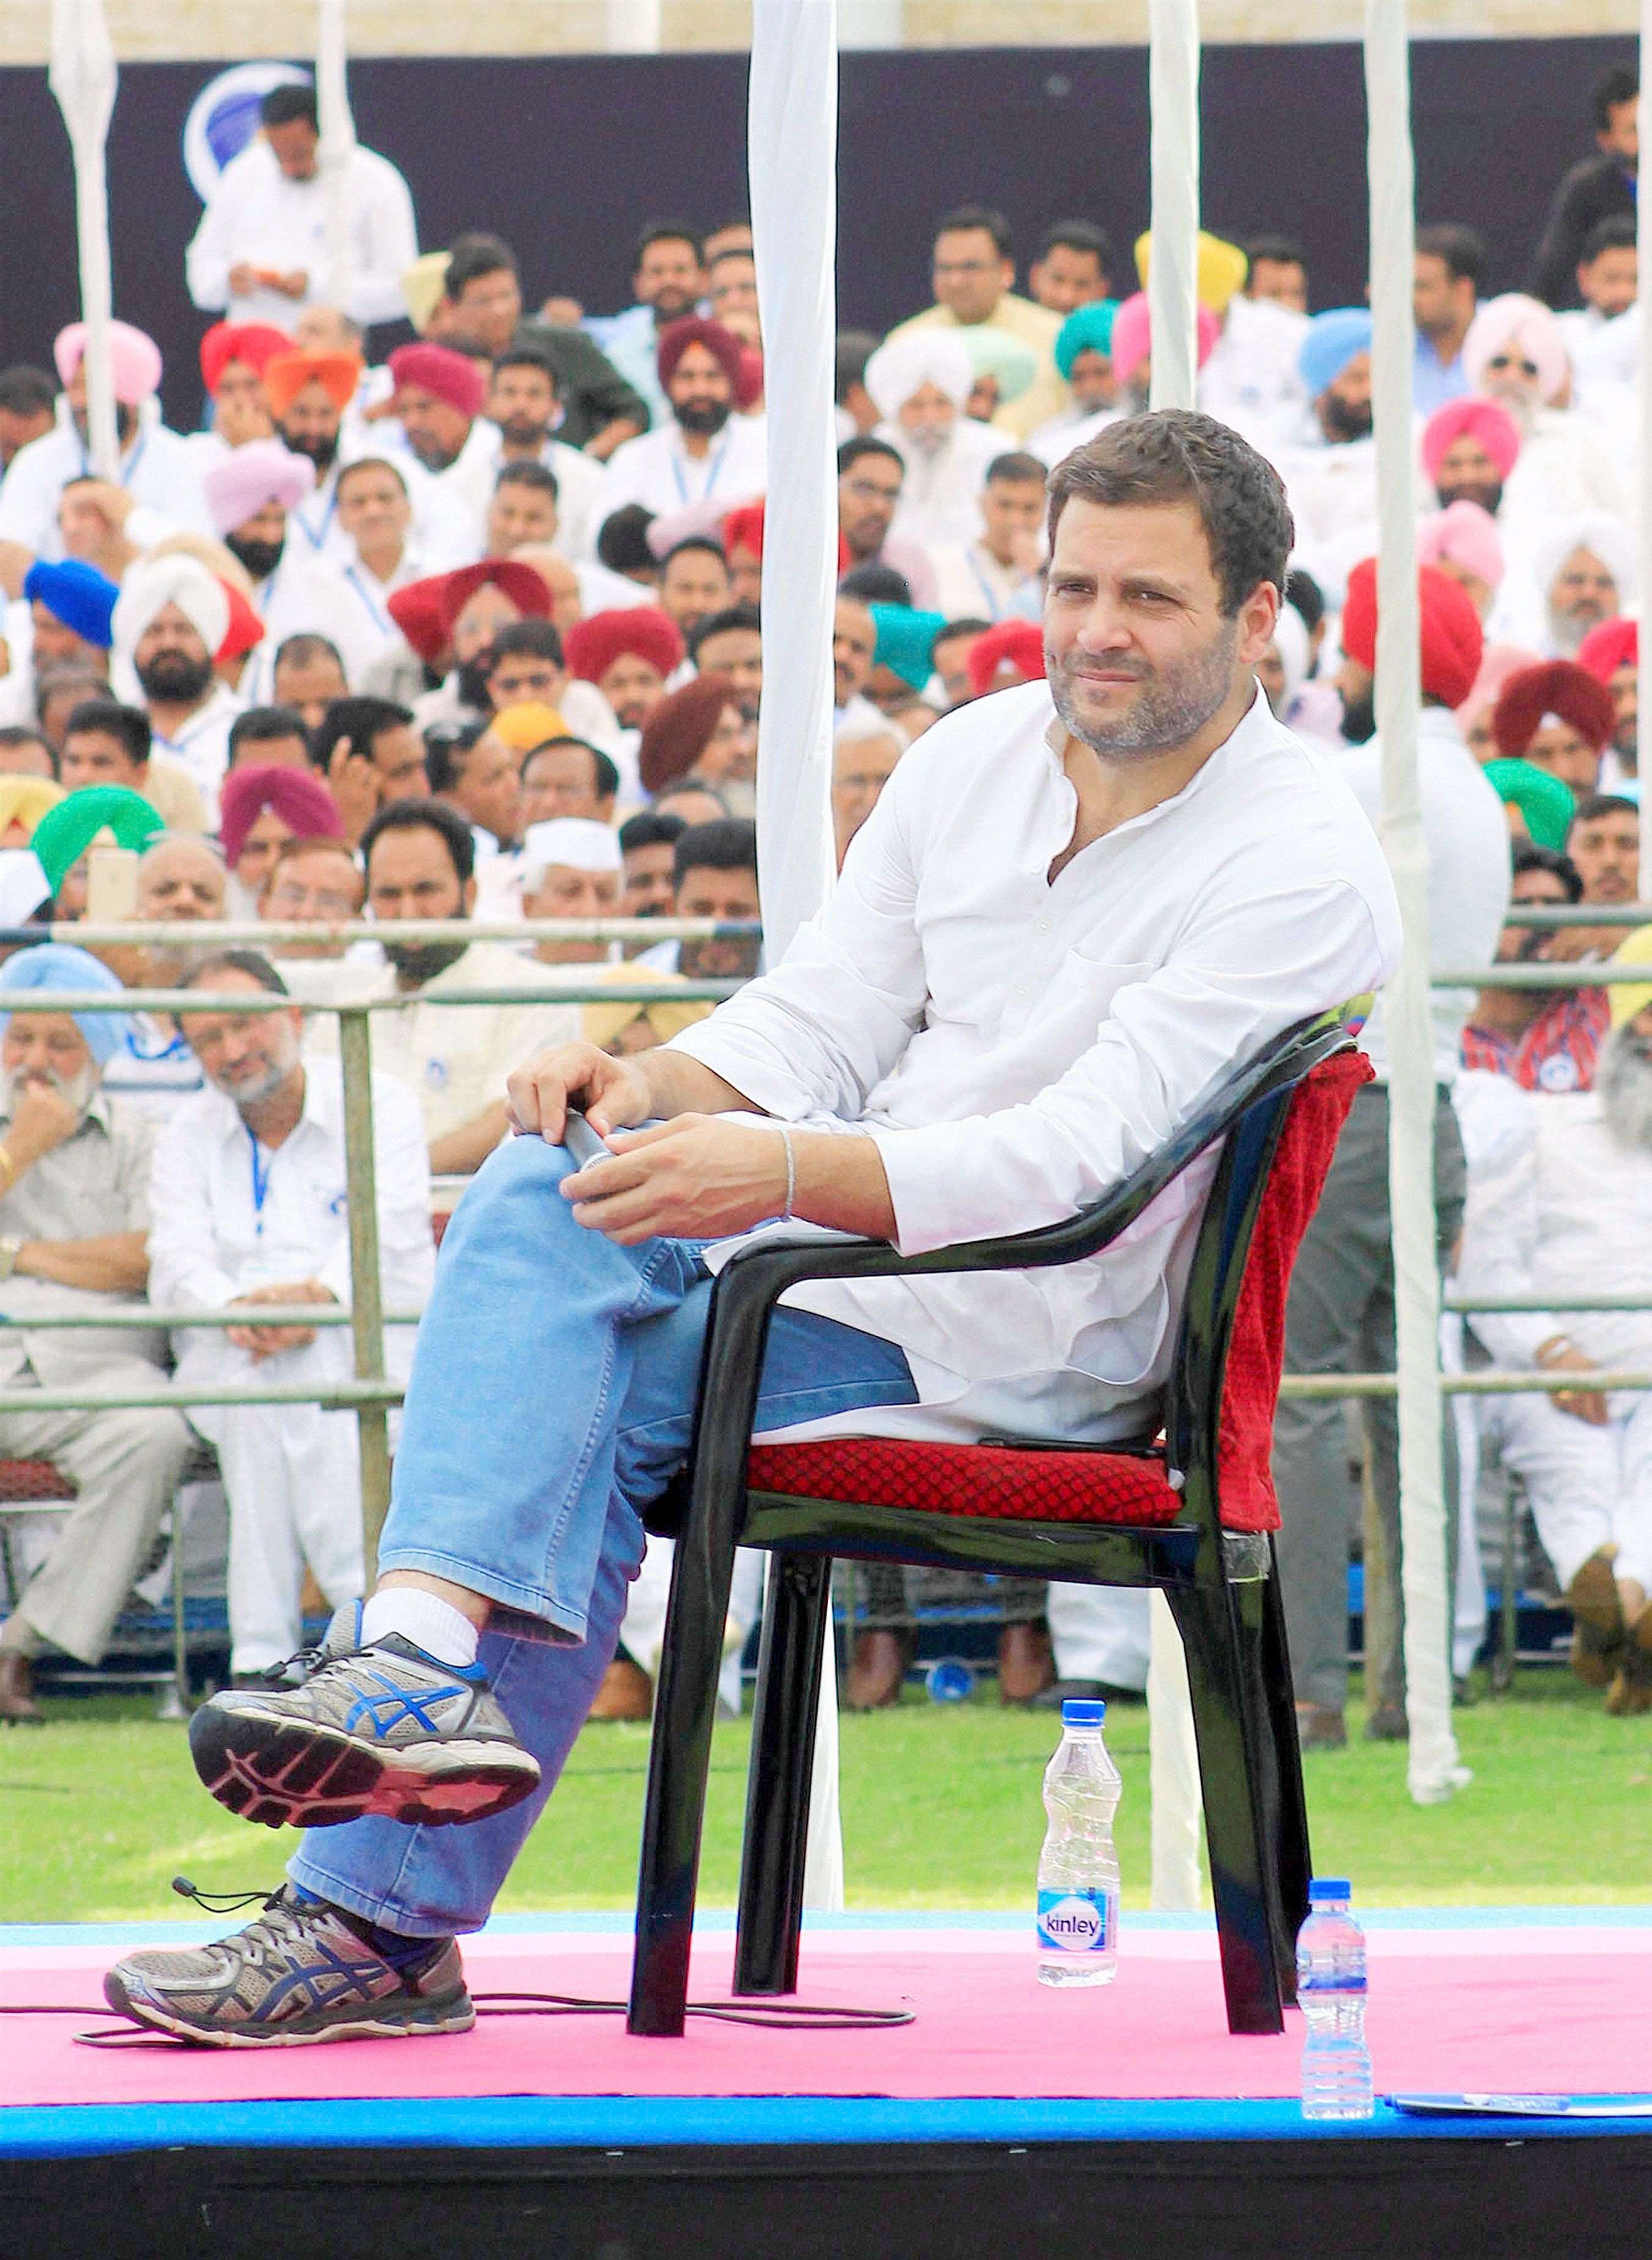 Politics of humour: Laughing at Rahul is okay, but not at anything or anyone in the saffron zone 